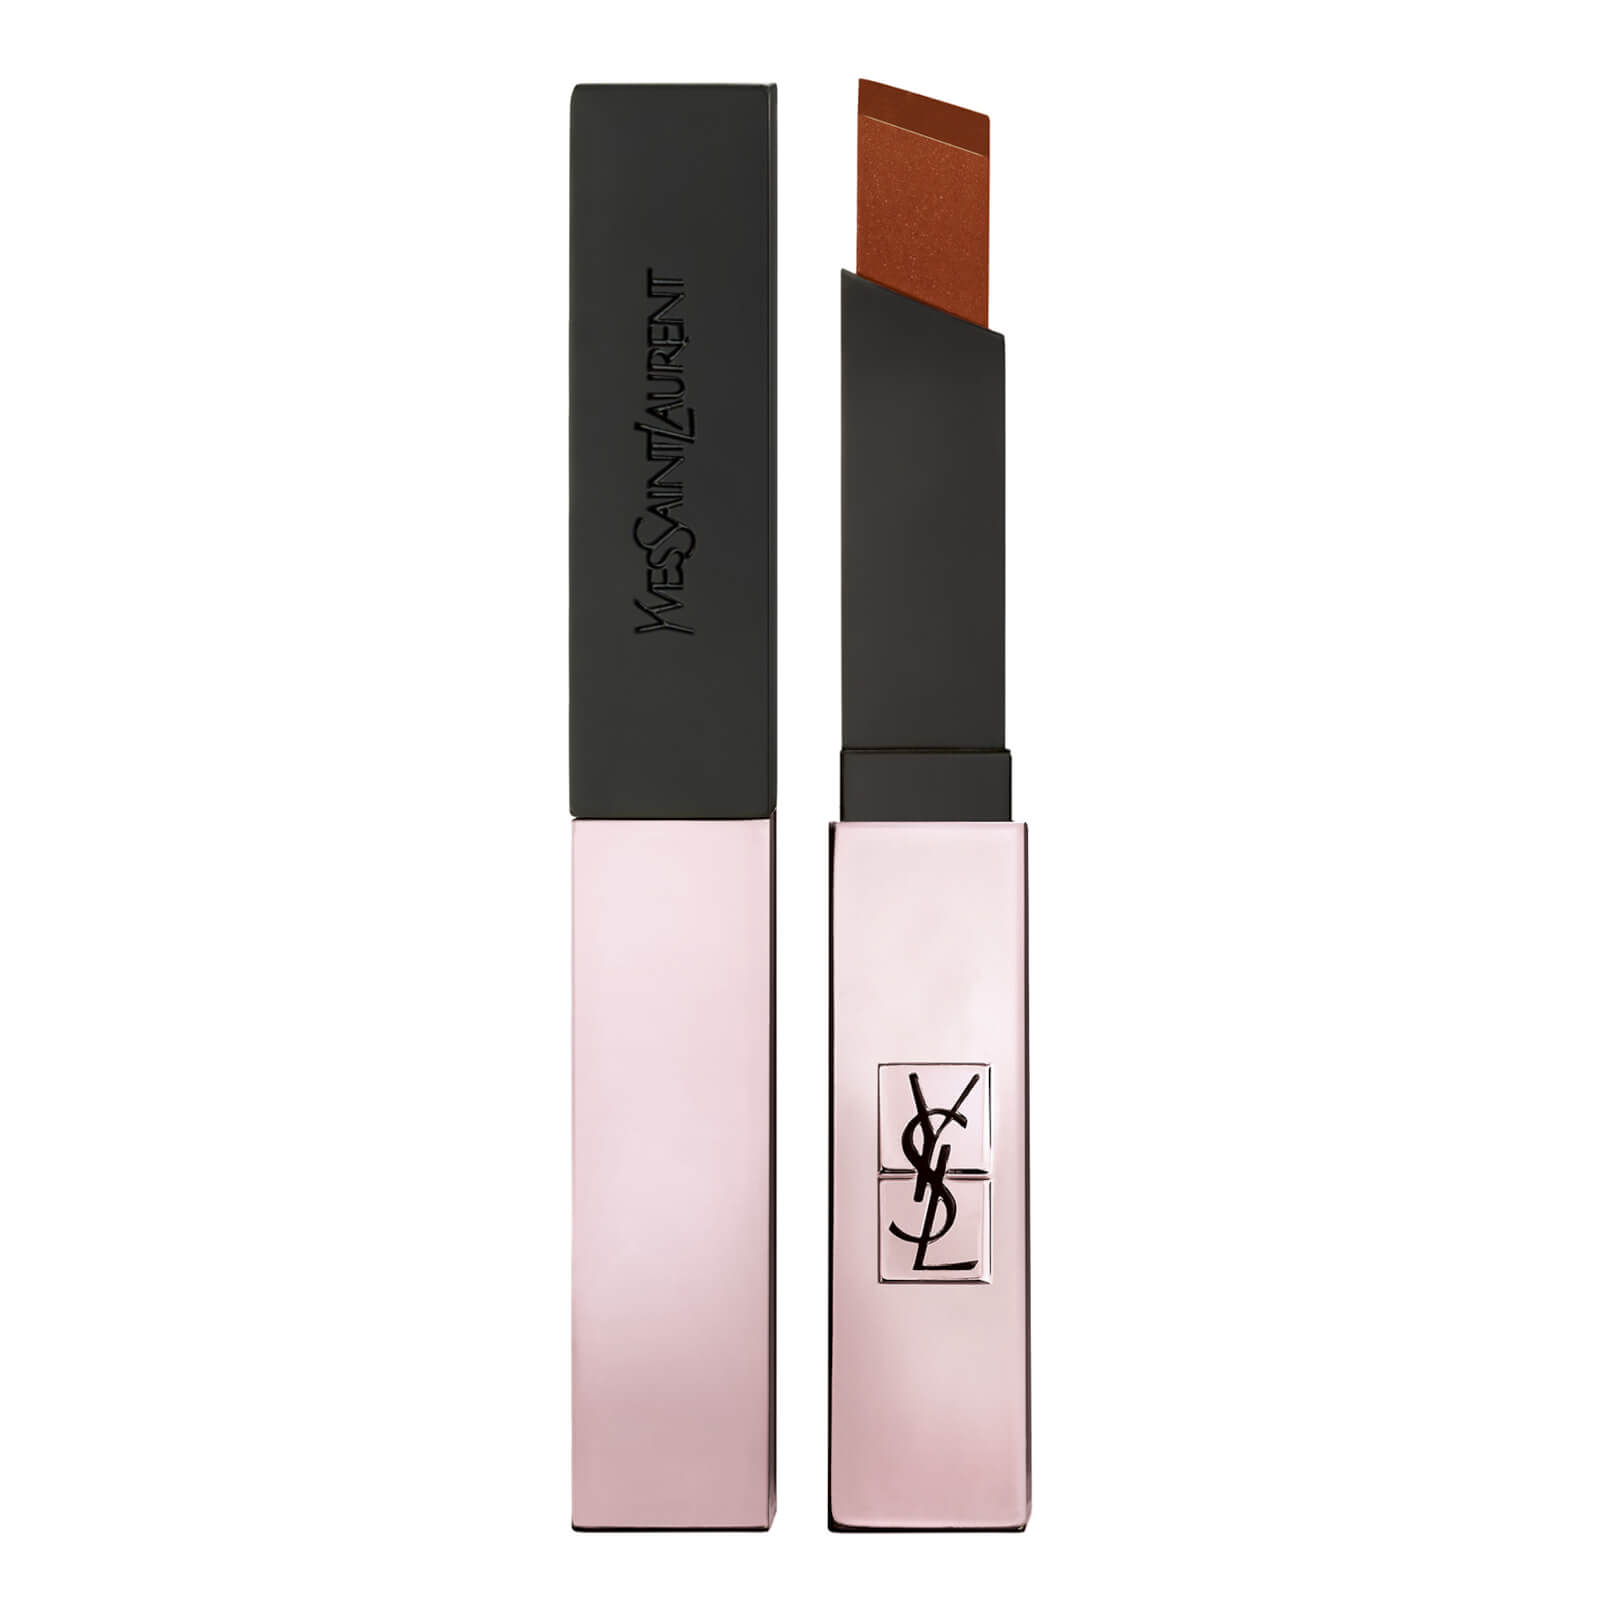 Yves Saint Laurent Rouge Pur Couture The Slim Glow Matte Lipstick 2g (Various Shades) - 214 No Taboo Orange product